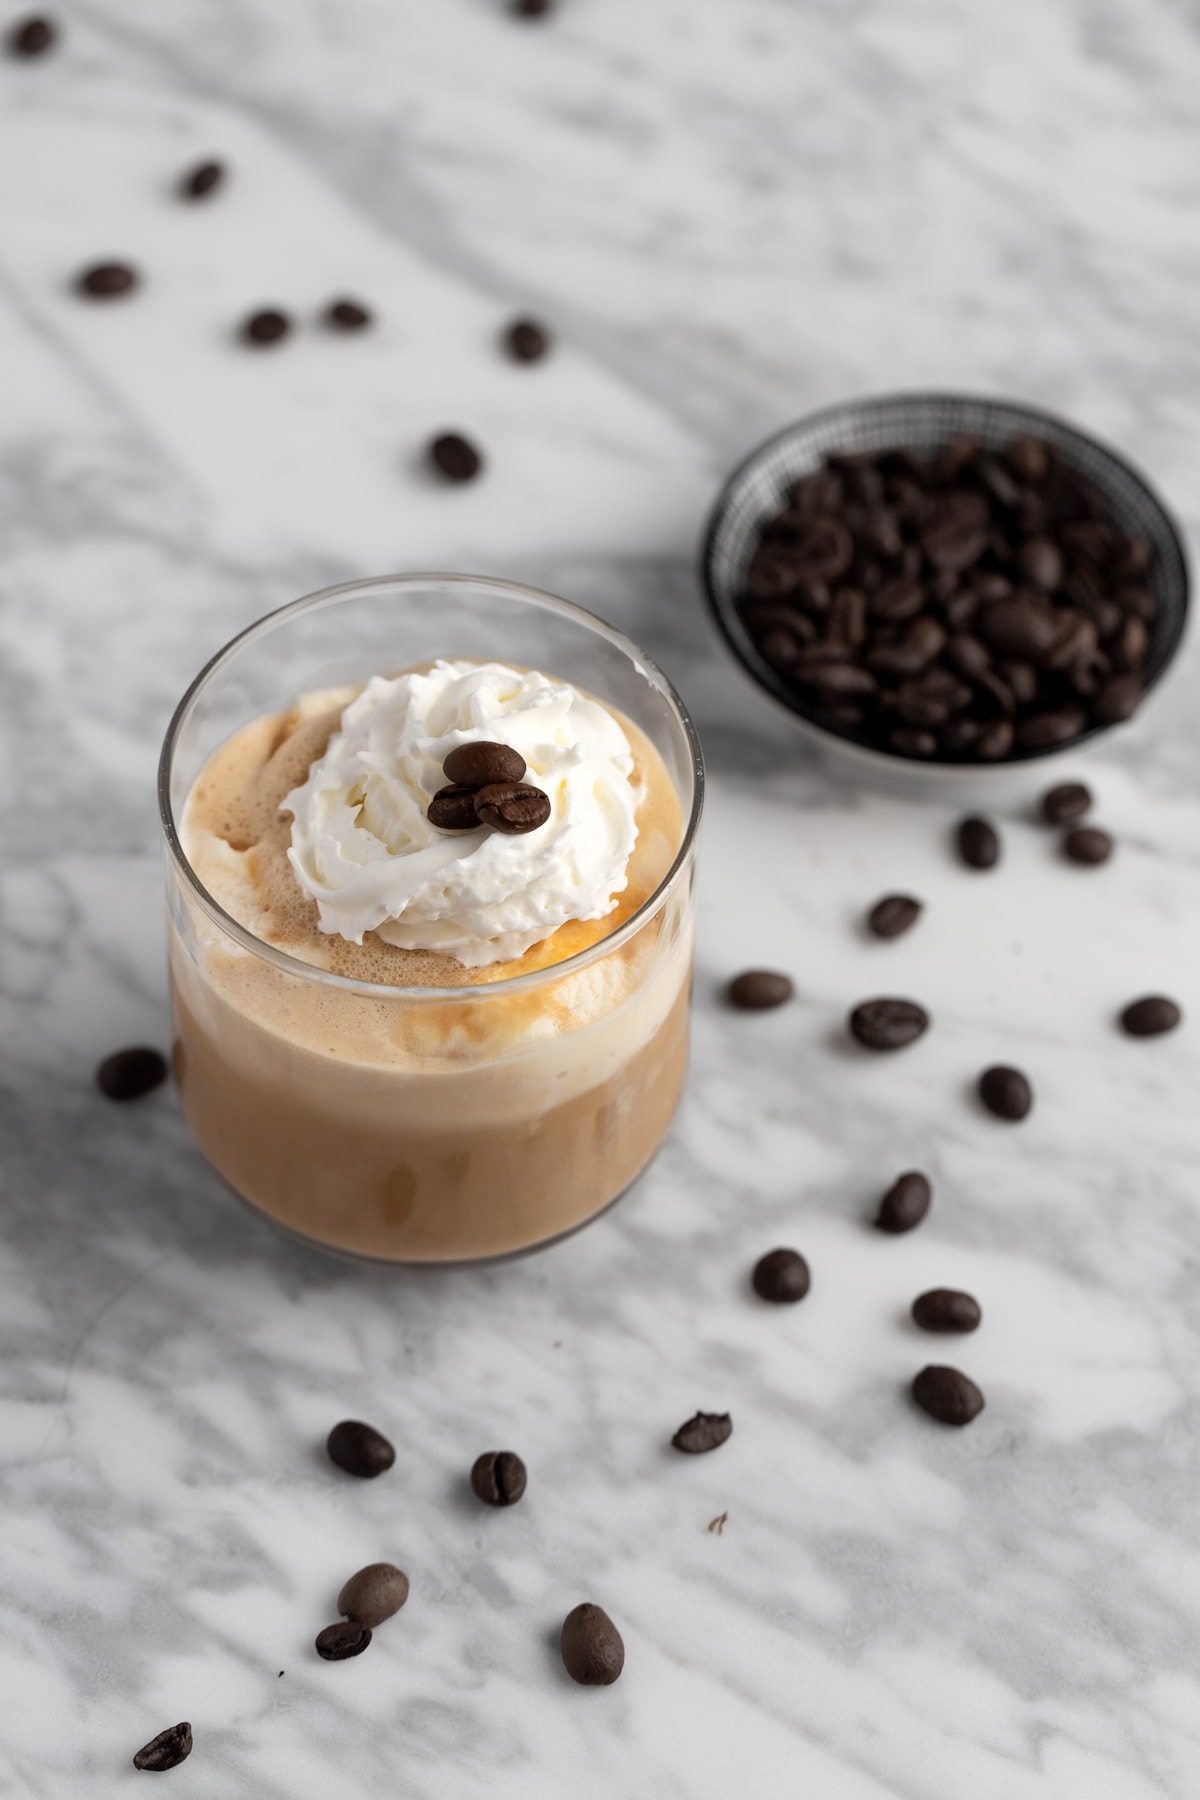 Coffee with ice cream in a glass, on a marble table next to scattered coffee beans.